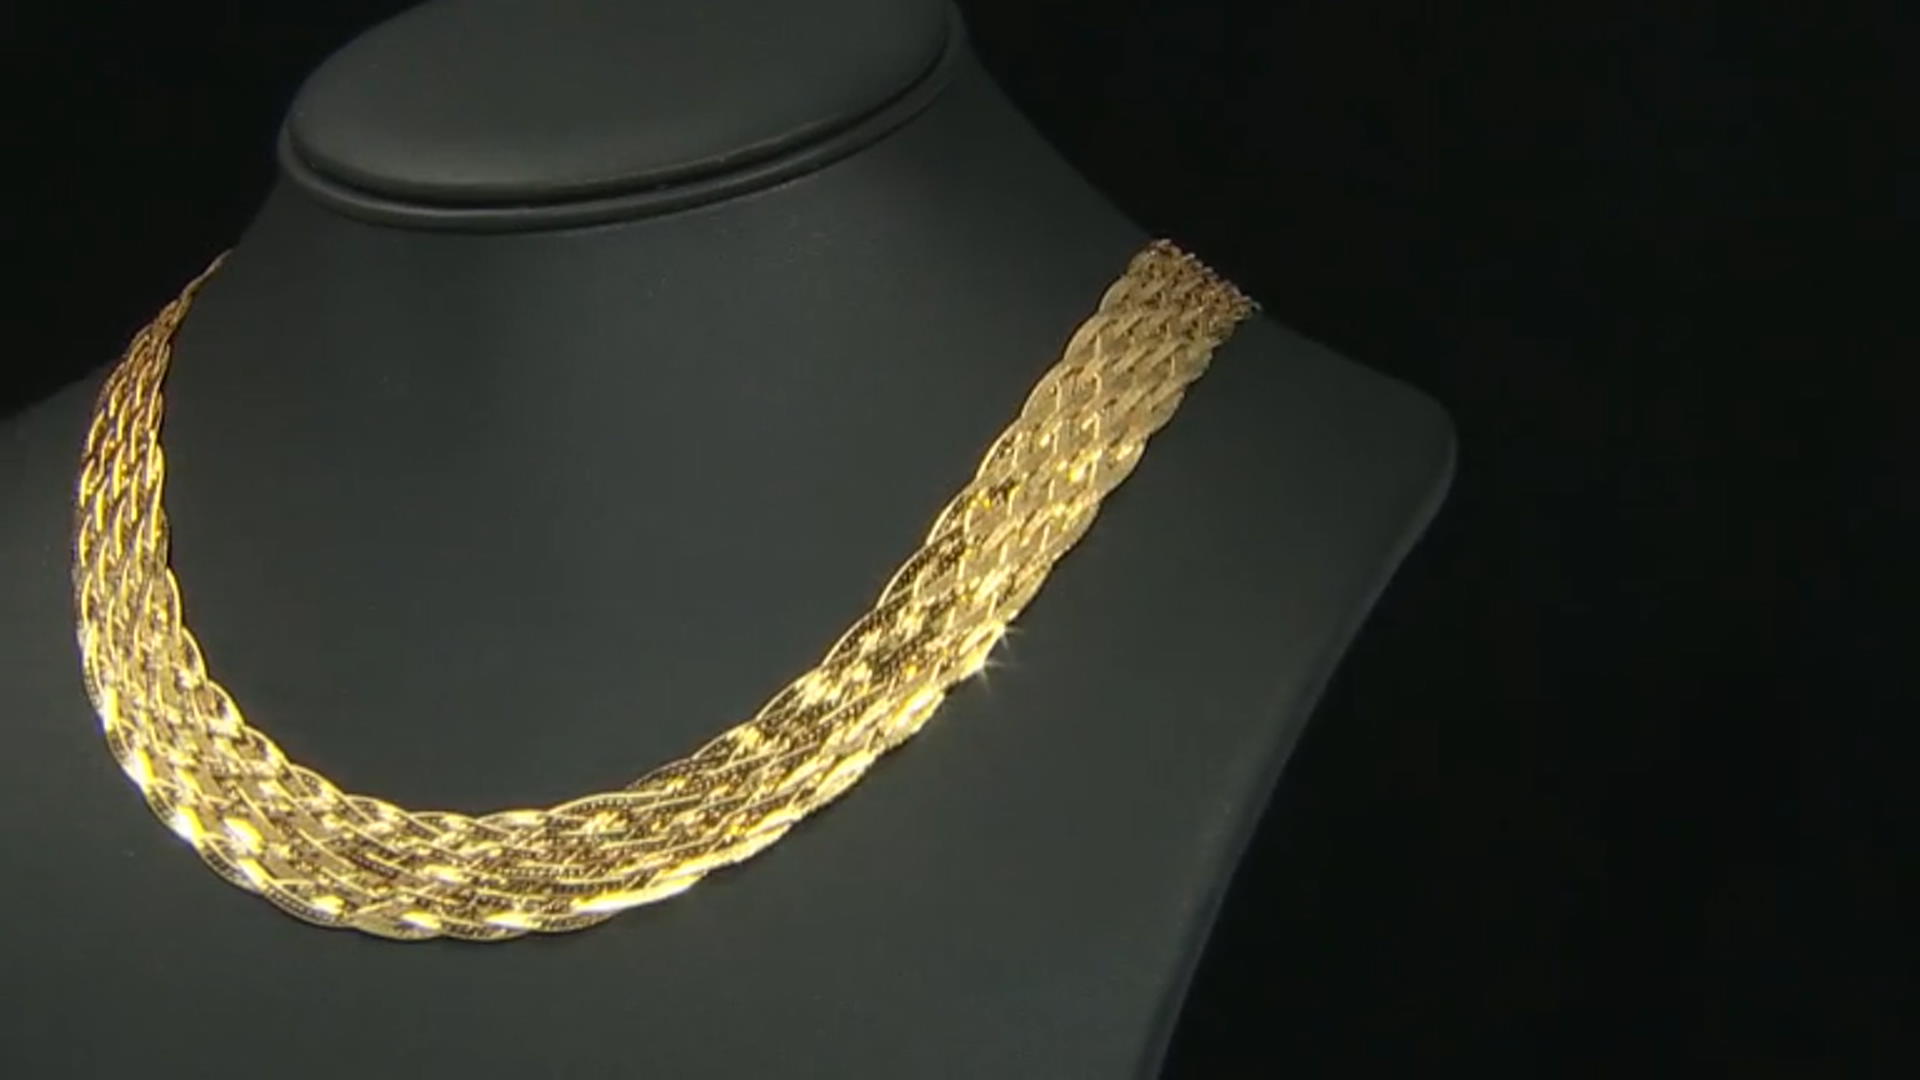 18K Yellow Gold Over Sterling Silver Braided Necklace Video Thumbnail